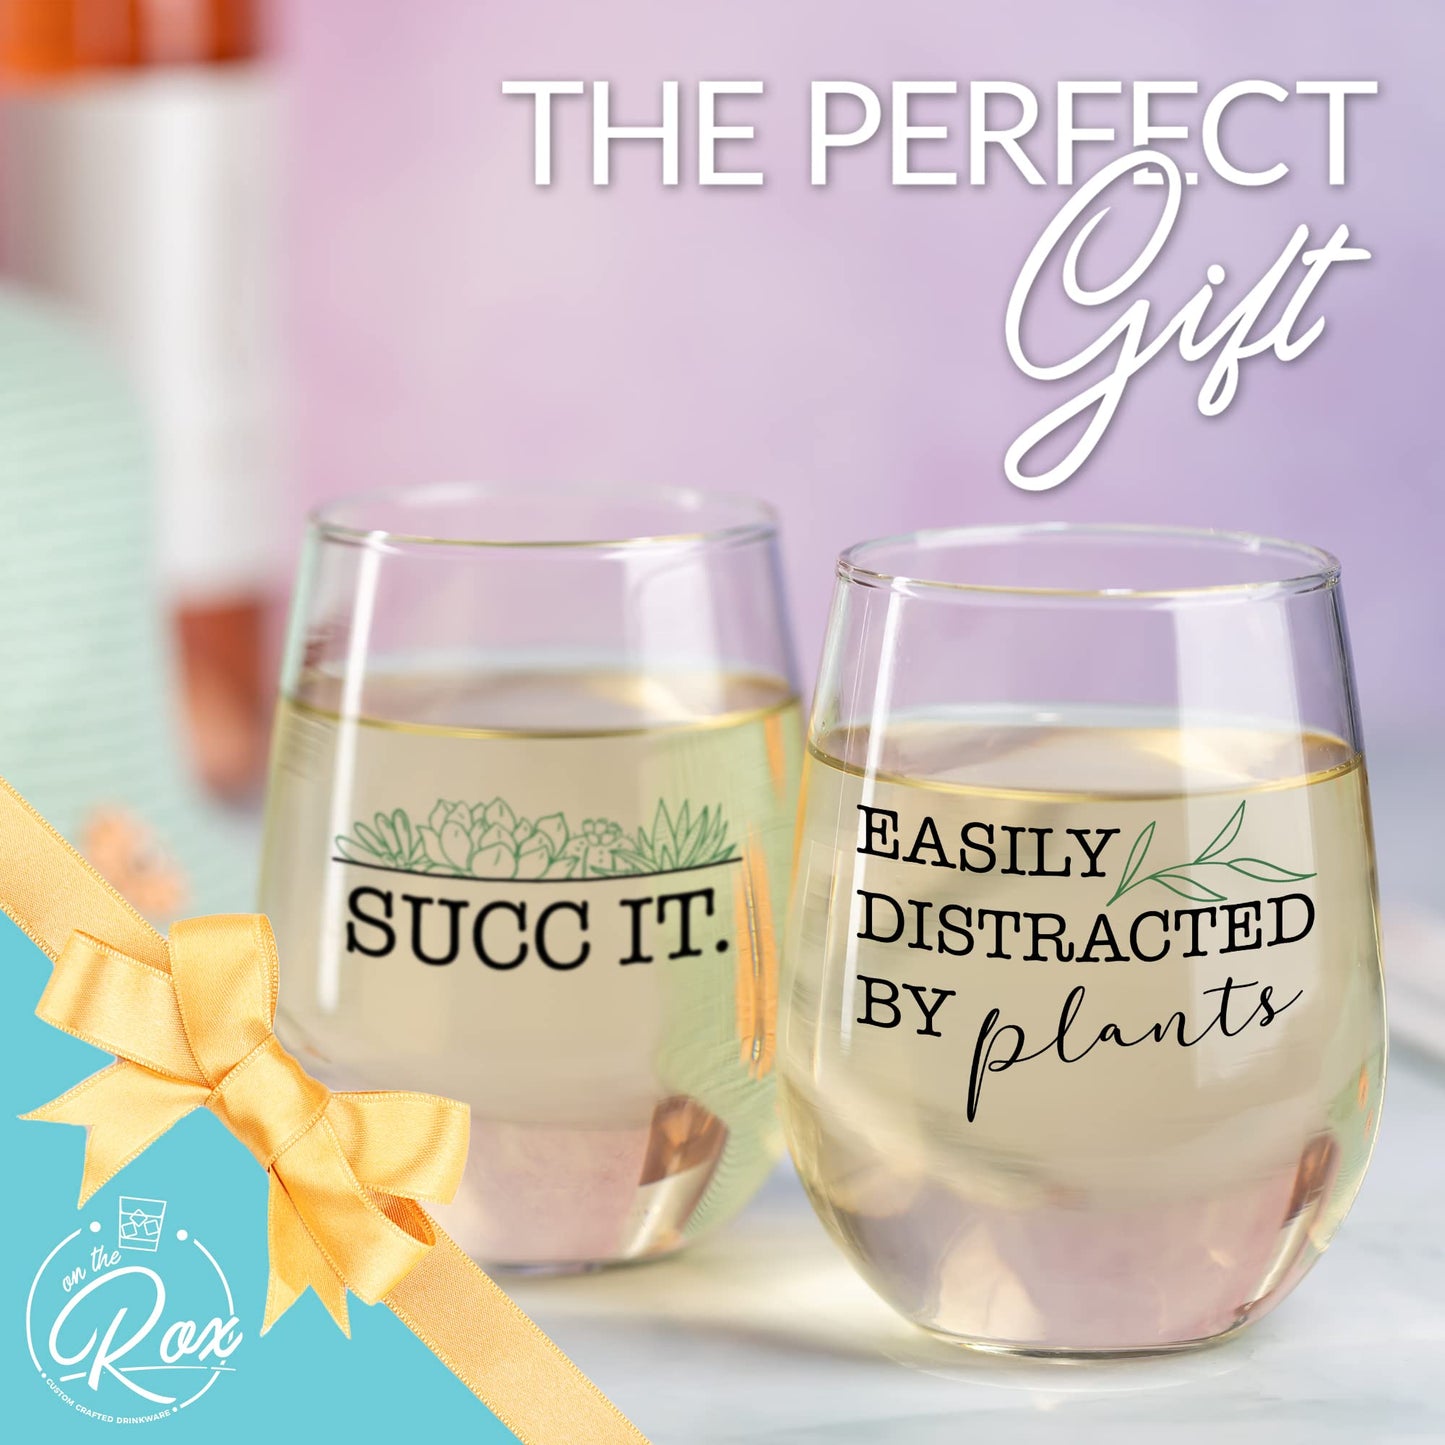 On The Rox Drinks Plant Lady Succulent Cactus Gifts for Women- Set of 2 Funny Wine Glasses 15oz (Easily Distracted by Plants - Succ It) - Printed